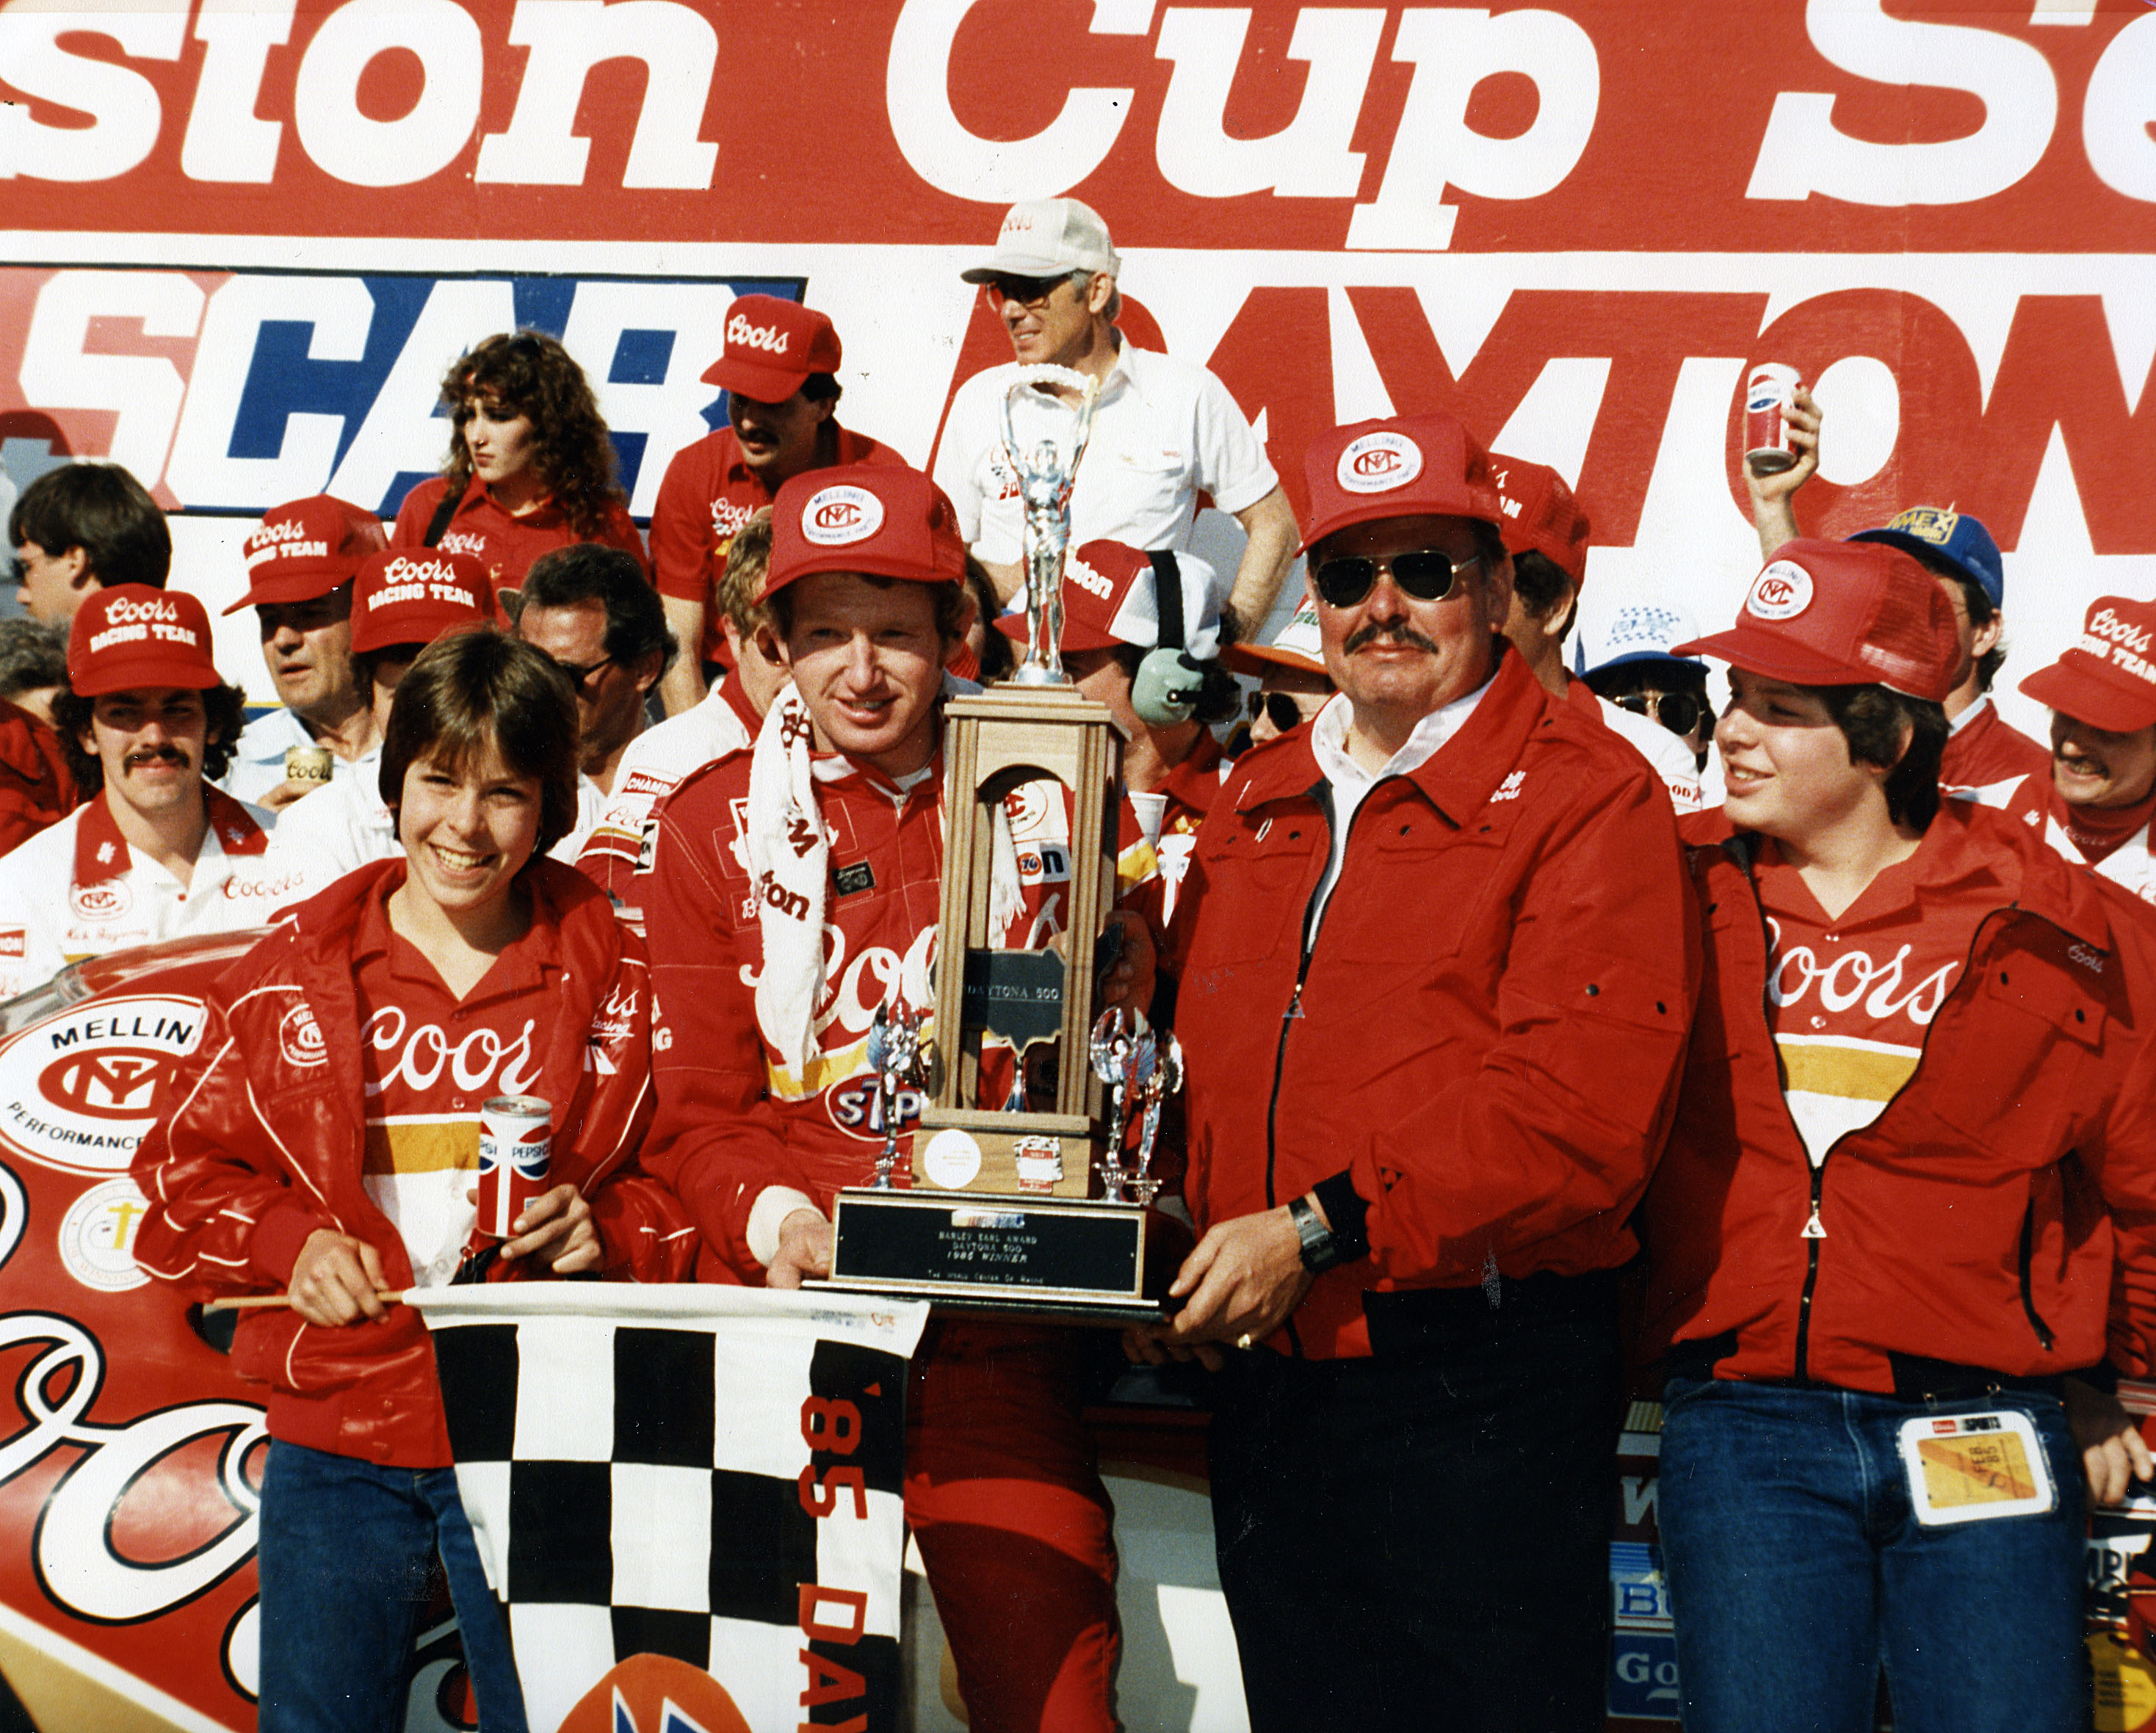 Driver Bill Elliott and his car owner Harry Melling are joined by Melling?s sons Matt (far left) and Mark (far right) after Elliott won the Daytona 500 NASCAR Cup race at Daytona International Speedway